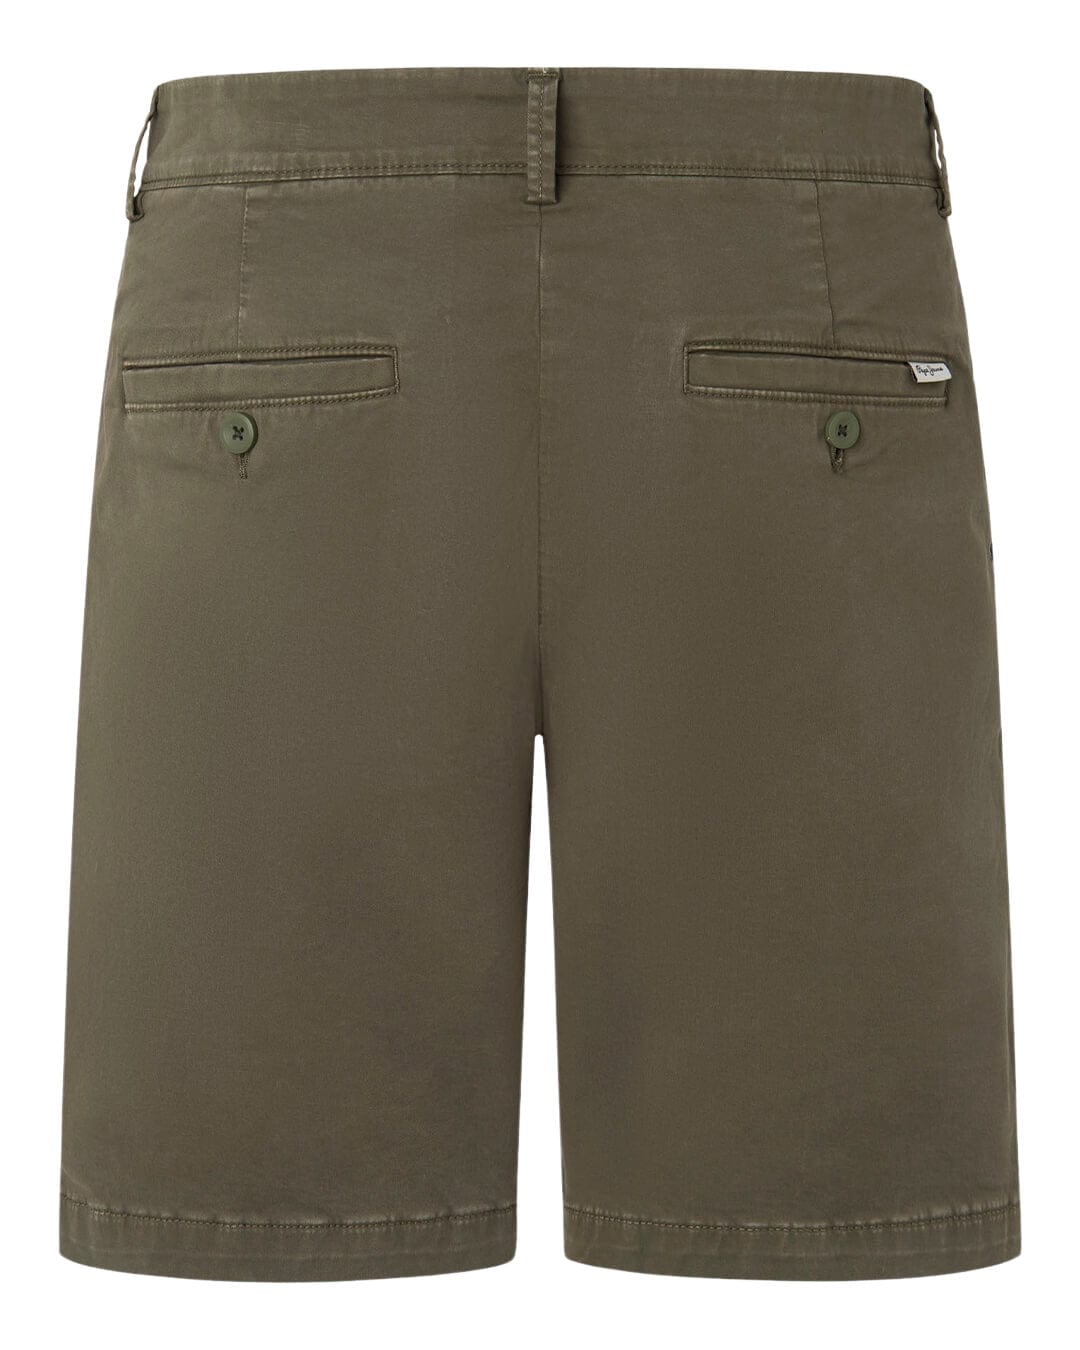 Pepe Jeans Shorts Pepe Jeans Military Green Regular Fit Chino Shorts